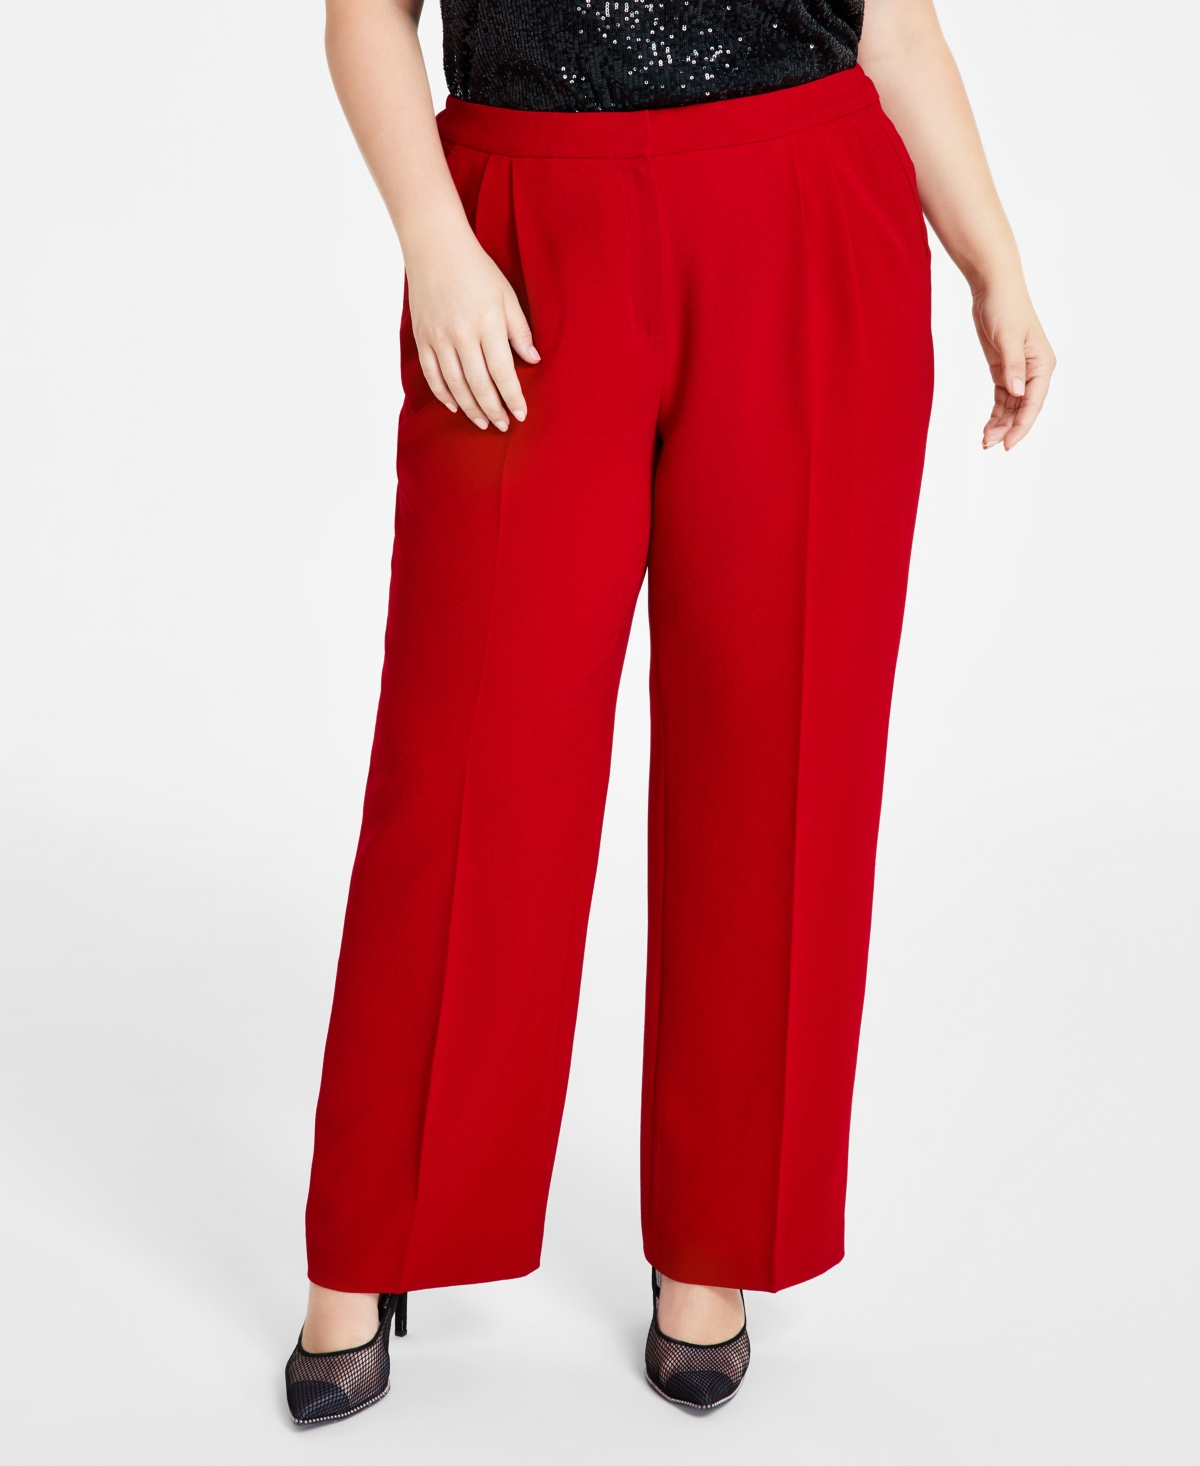 BAR III PLUS SIZE TEXTURED CREPE WIDE-LEG PANTS, CREATED FOR MACY'S